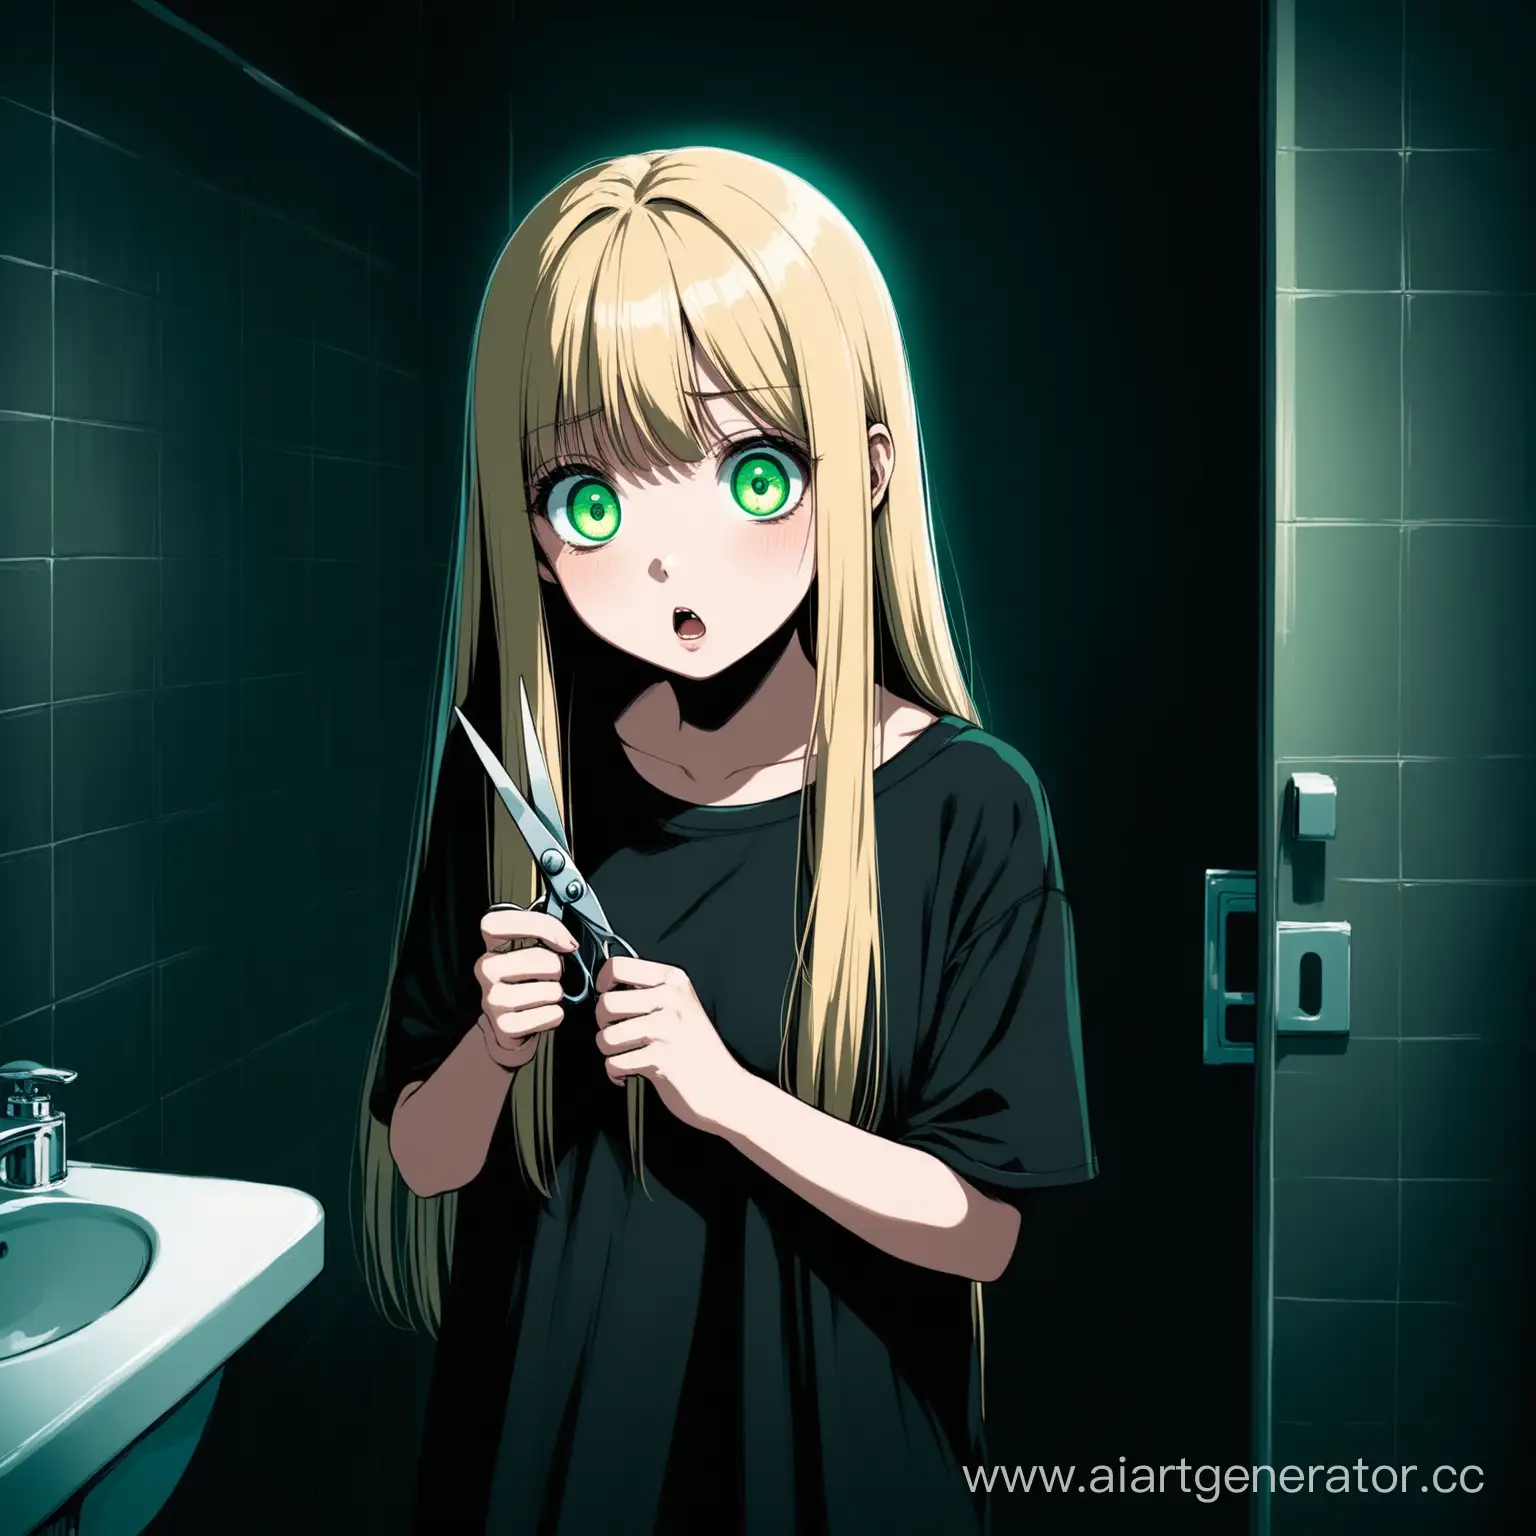 girl, big green eyes, long blonde straight hair with straight bangs, she is wearing a black oversize T-shirt, and in her hands are scissors, she is standing against the background of a bathroom, She looks scared, dark atmosphere